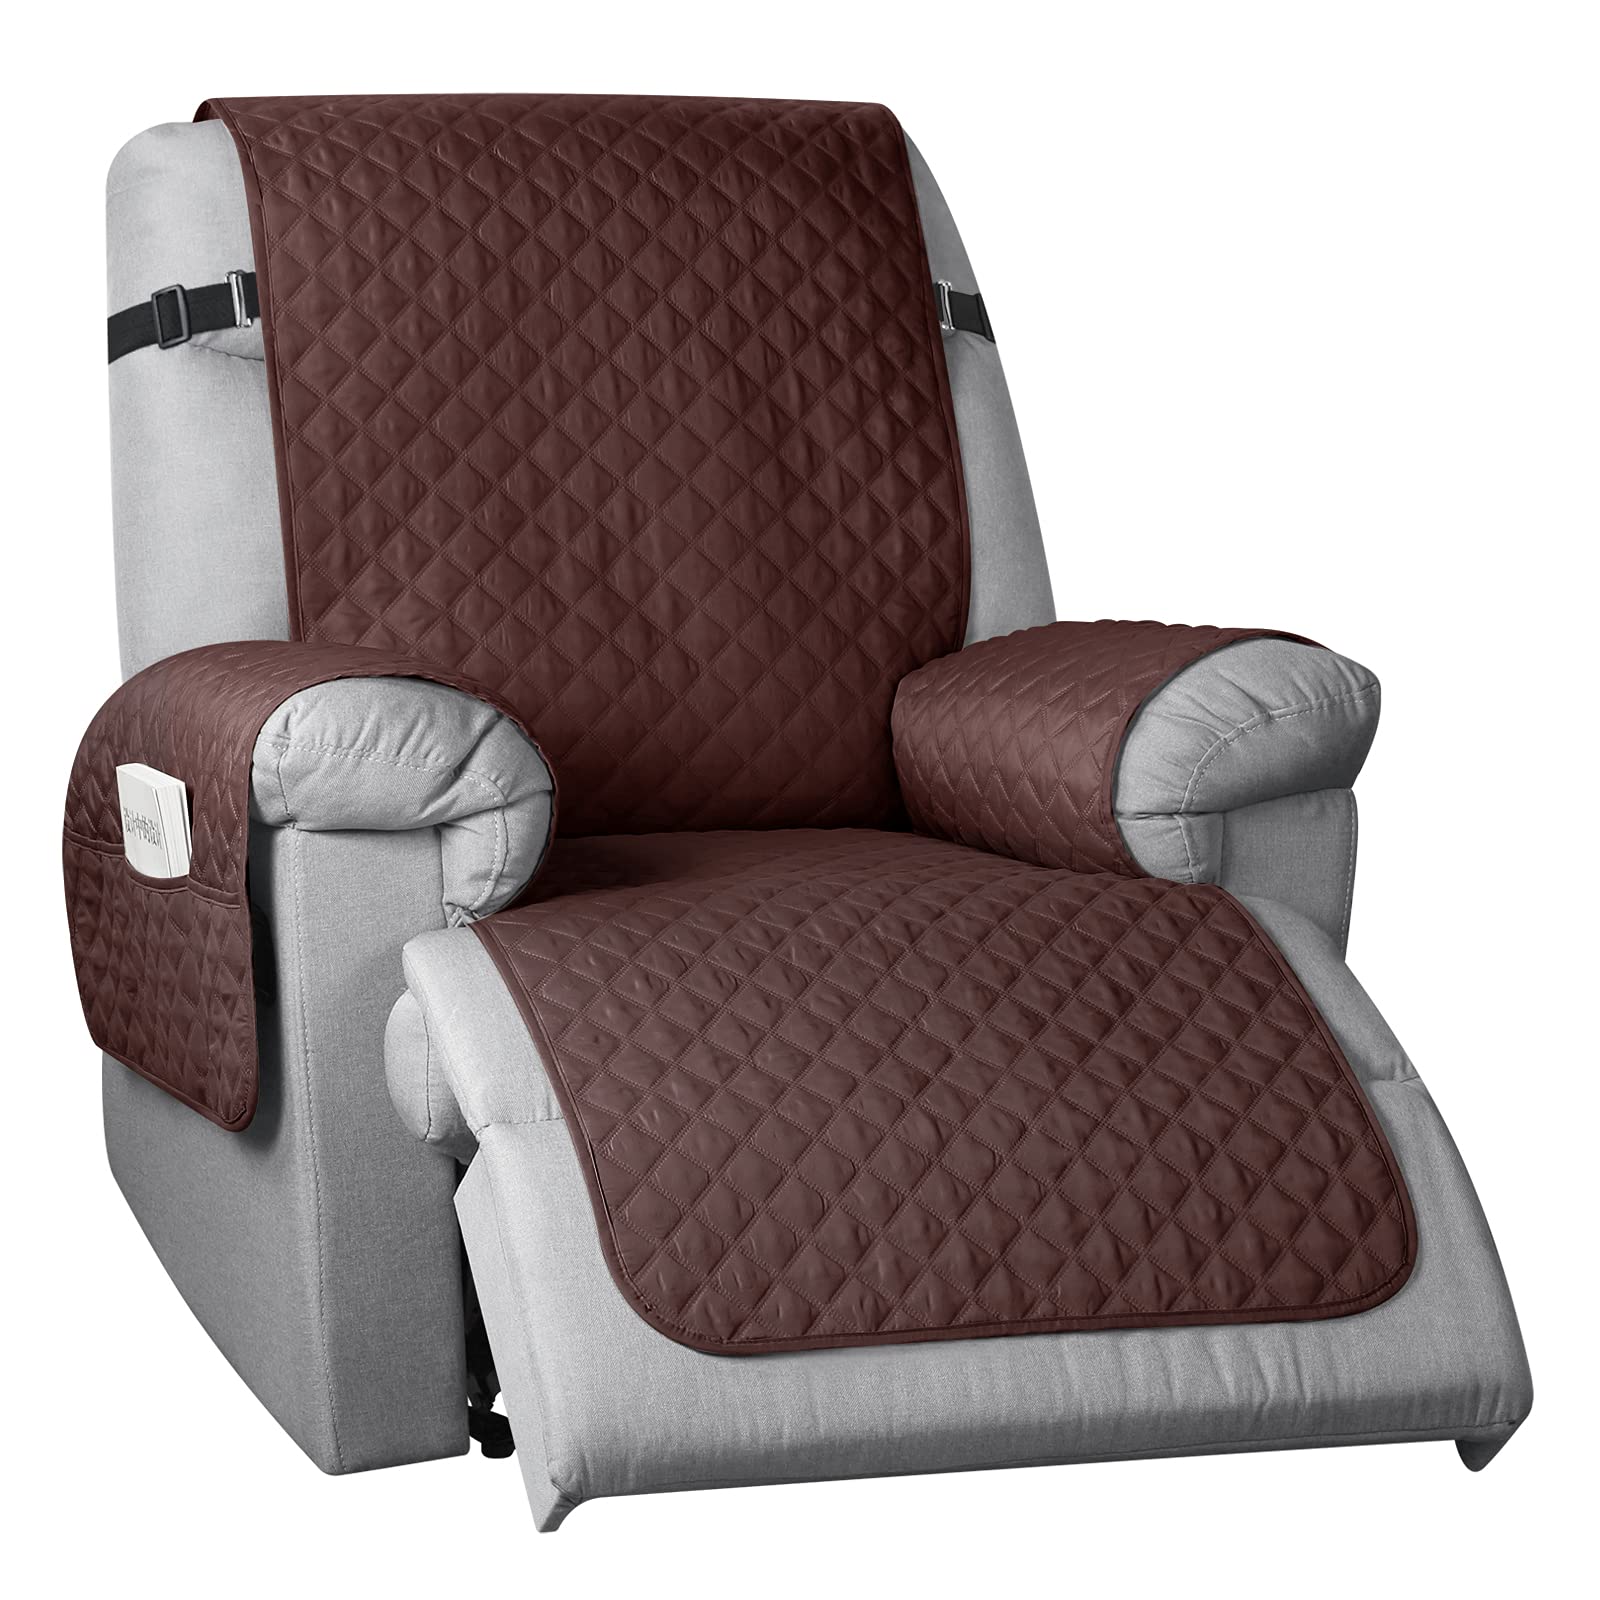 How to Recover a Recliner Seat Cushion